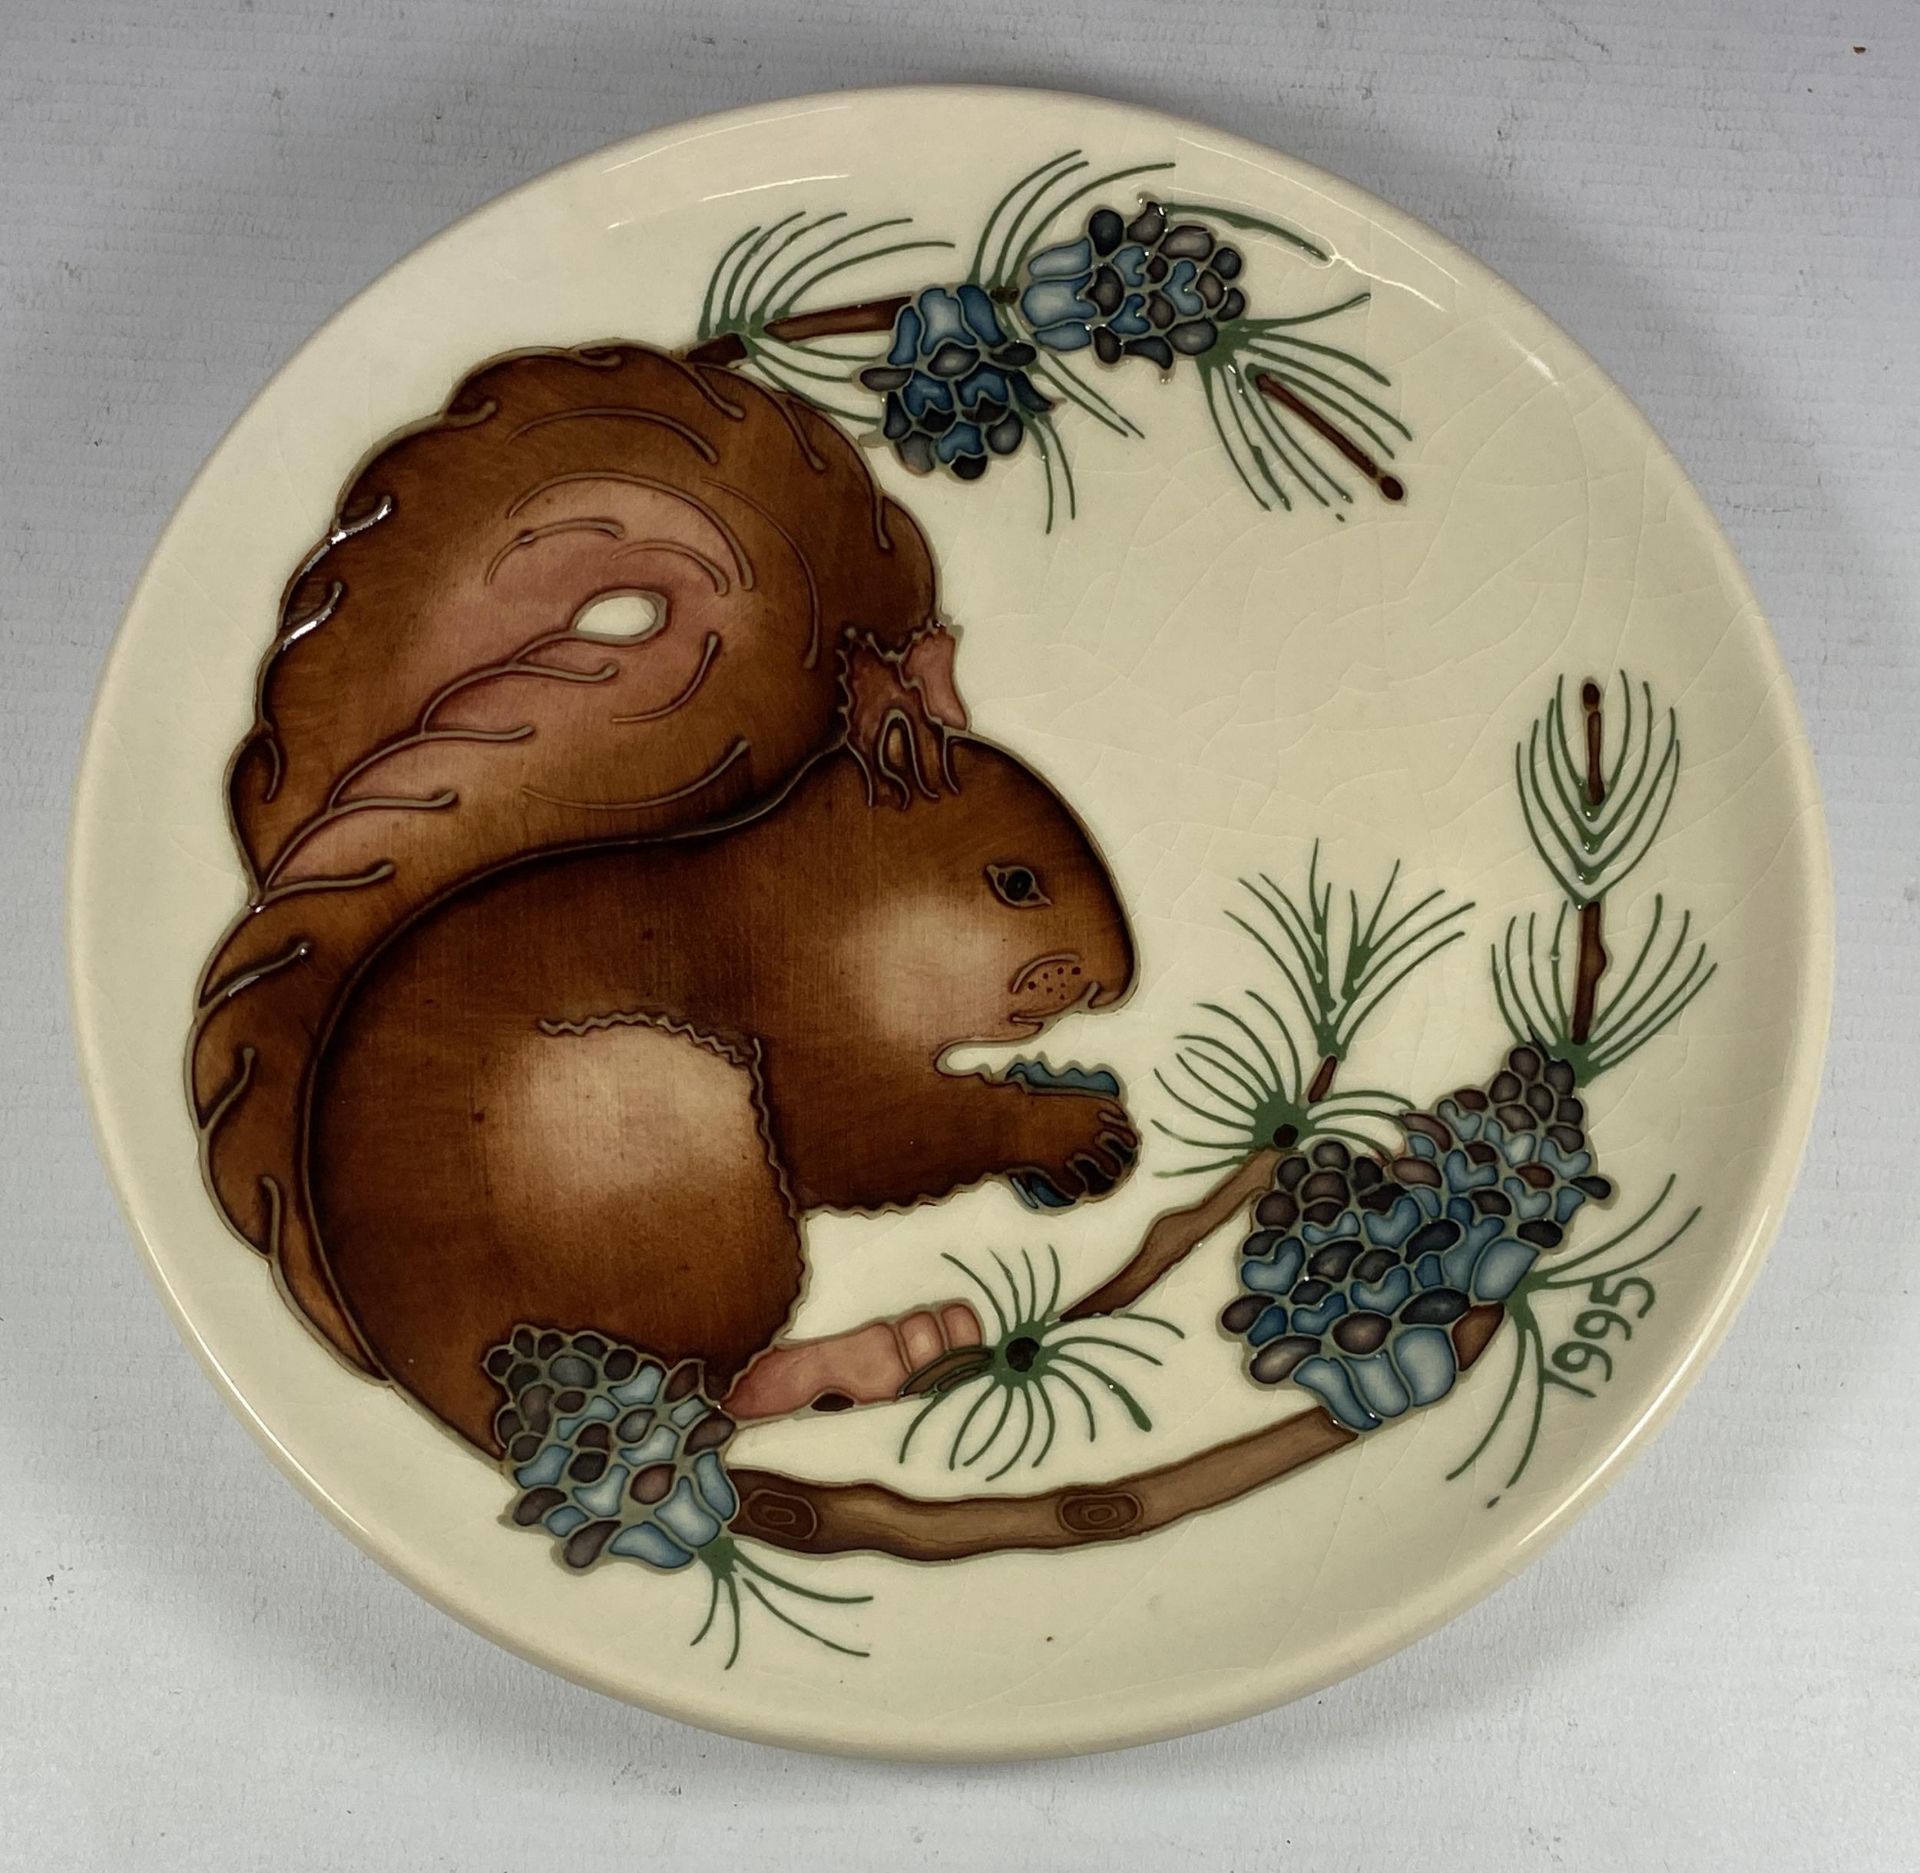 A LIMITED EDITION MOORCROFT POTTERY SQUIRREL PATTERN PLATE, NUMBER 330/500, 1995